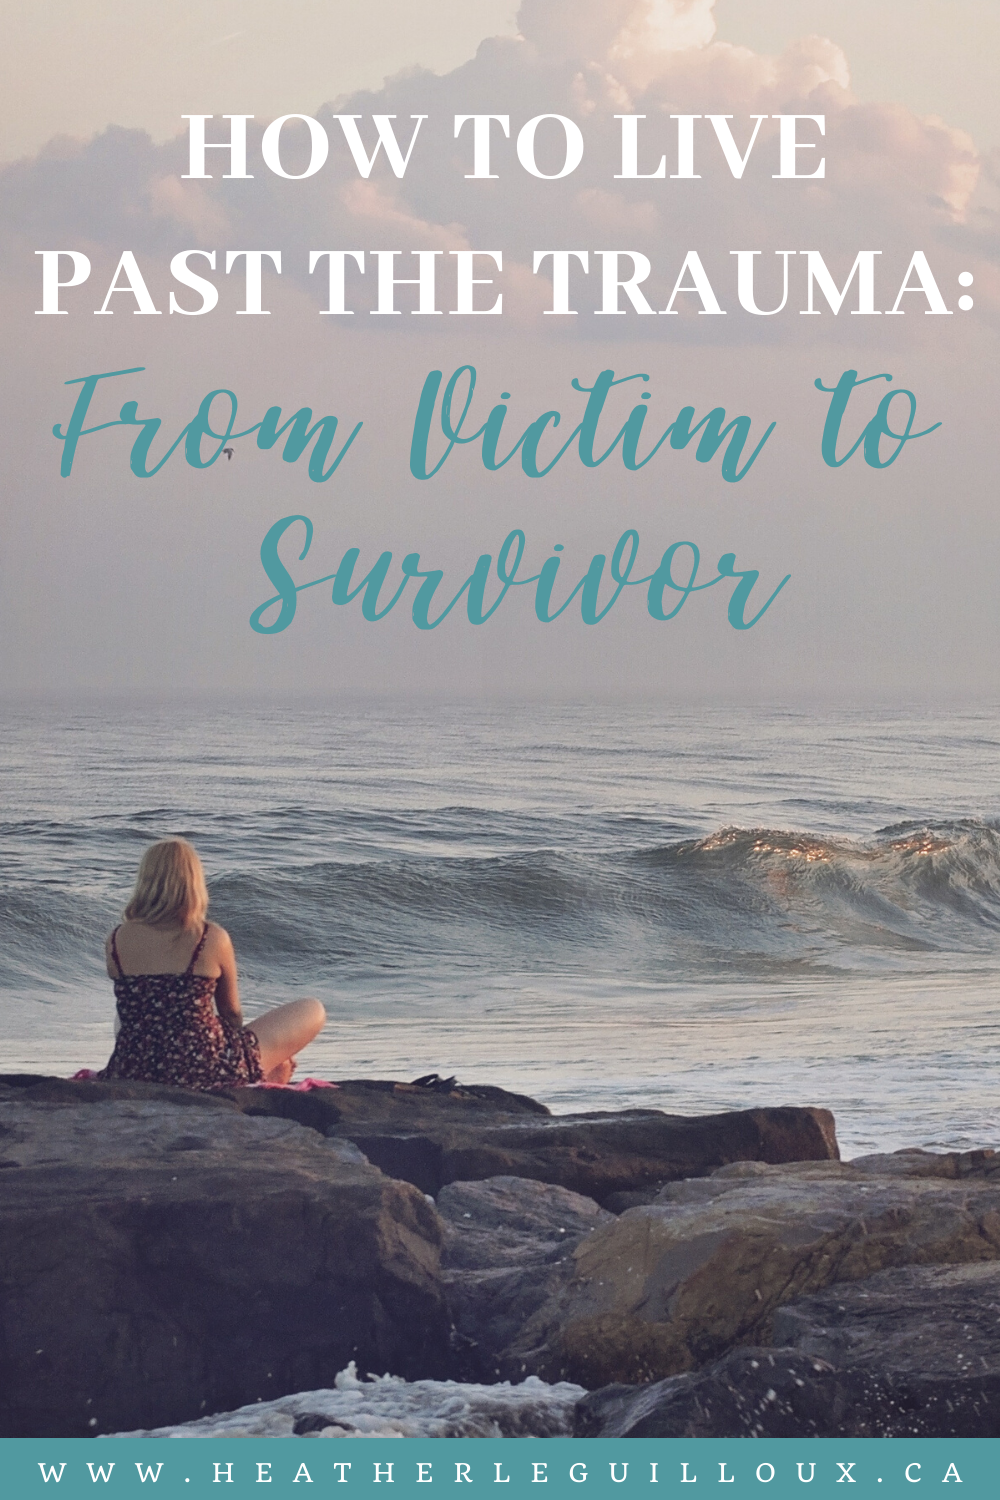 Survivors come from all sorts of backgrounds and stories. Some may have dealt with losing loved ones to an illness or a myriad of other kinds of trauma. But, one thing that unites us all is that trauma doesn’t have to define us. This guest post has been shared by Clarissa Thomas from pastthetrauma.com - a website dedicated to providing a safe, open and healthy environment where both survivors and those who support them can find hope, wisdom, and healing past the trauma. #trauma #survivor #hope